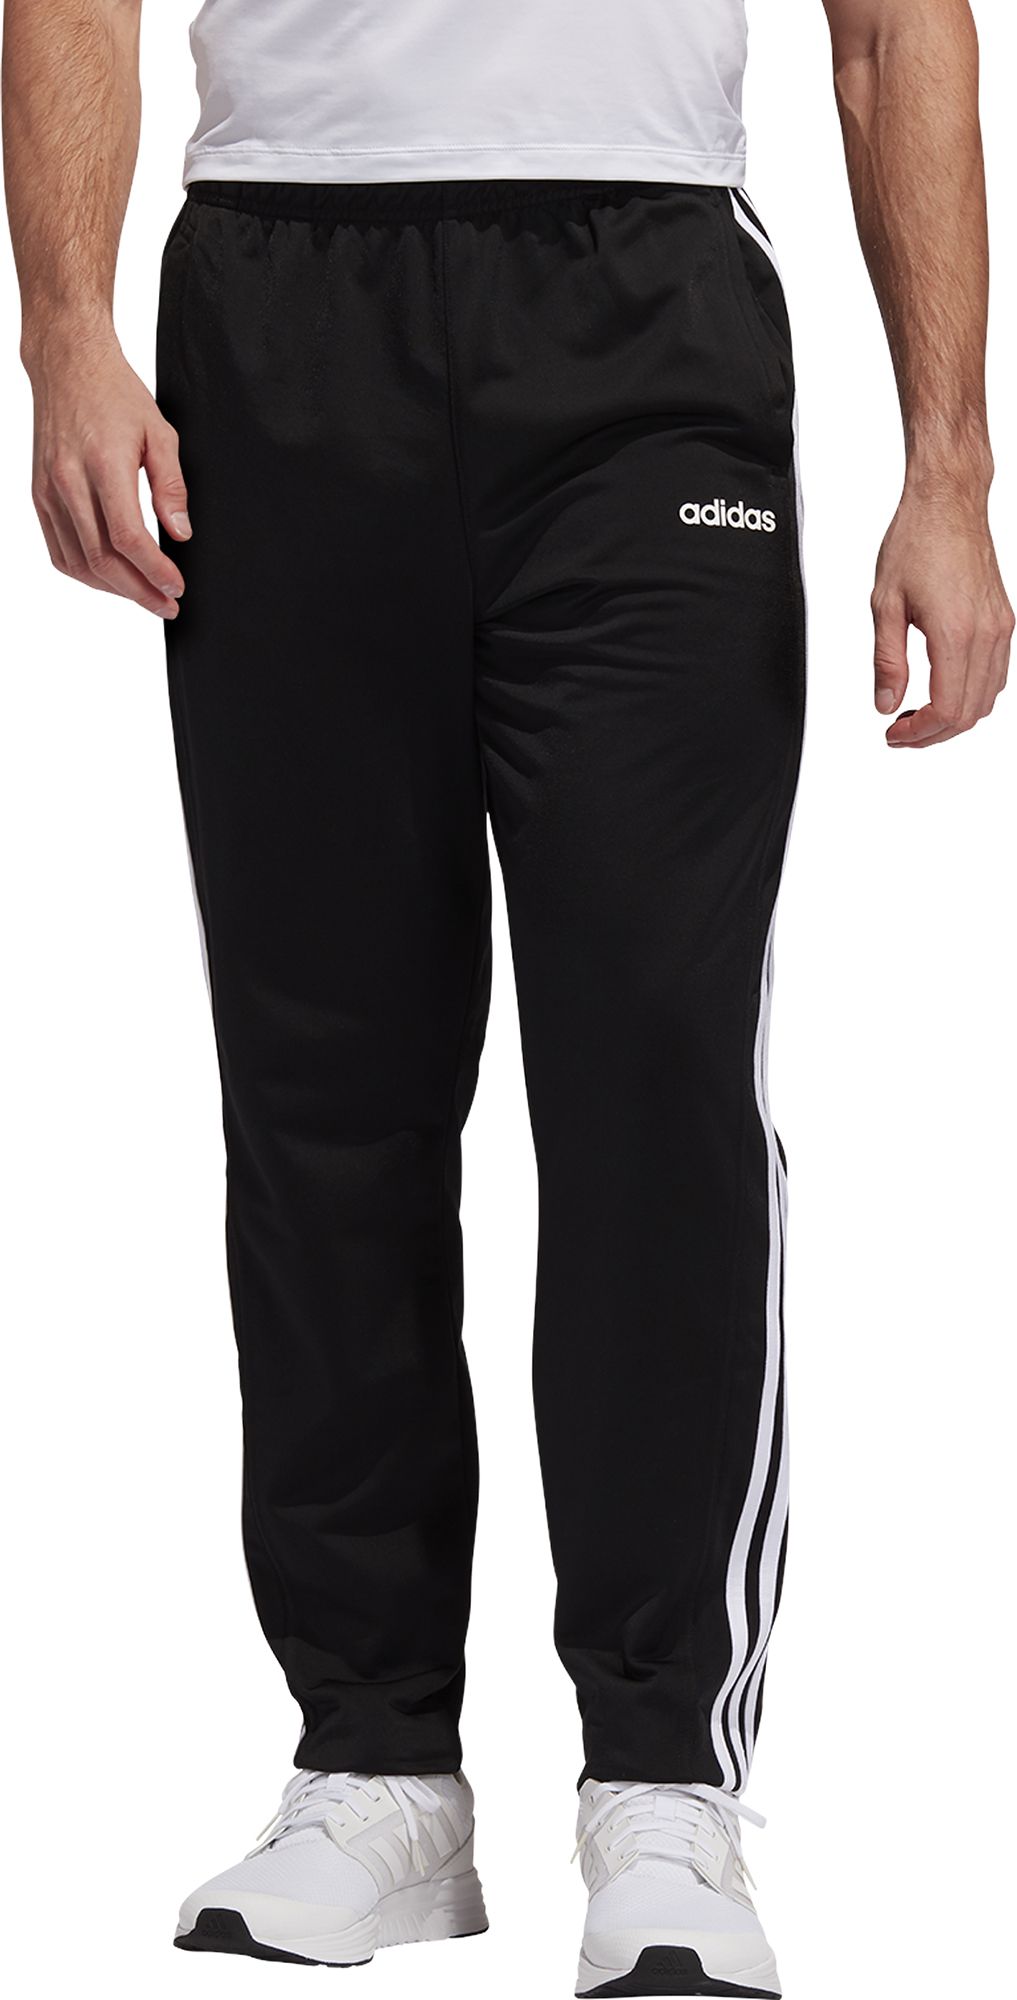 how much do adidas pants cost